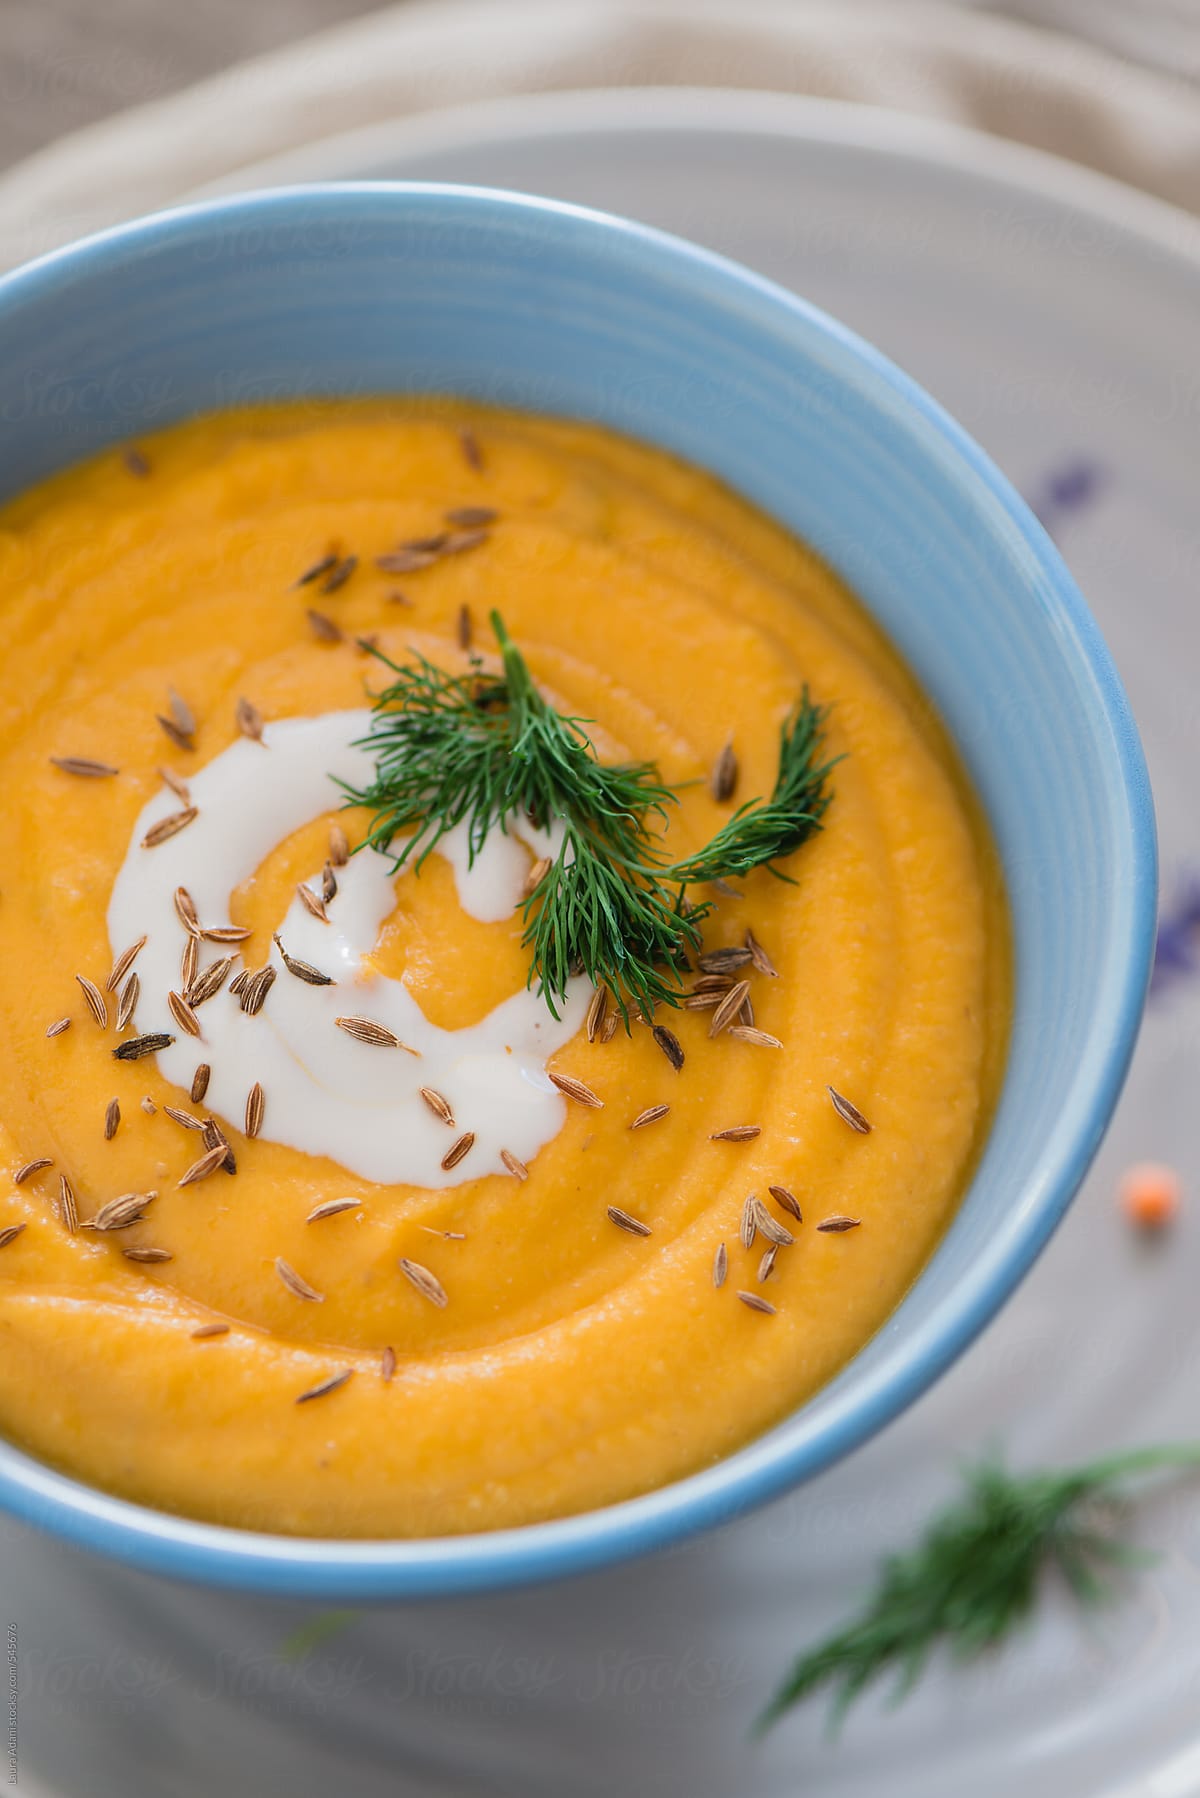 Red lentil soup with cumin seeds